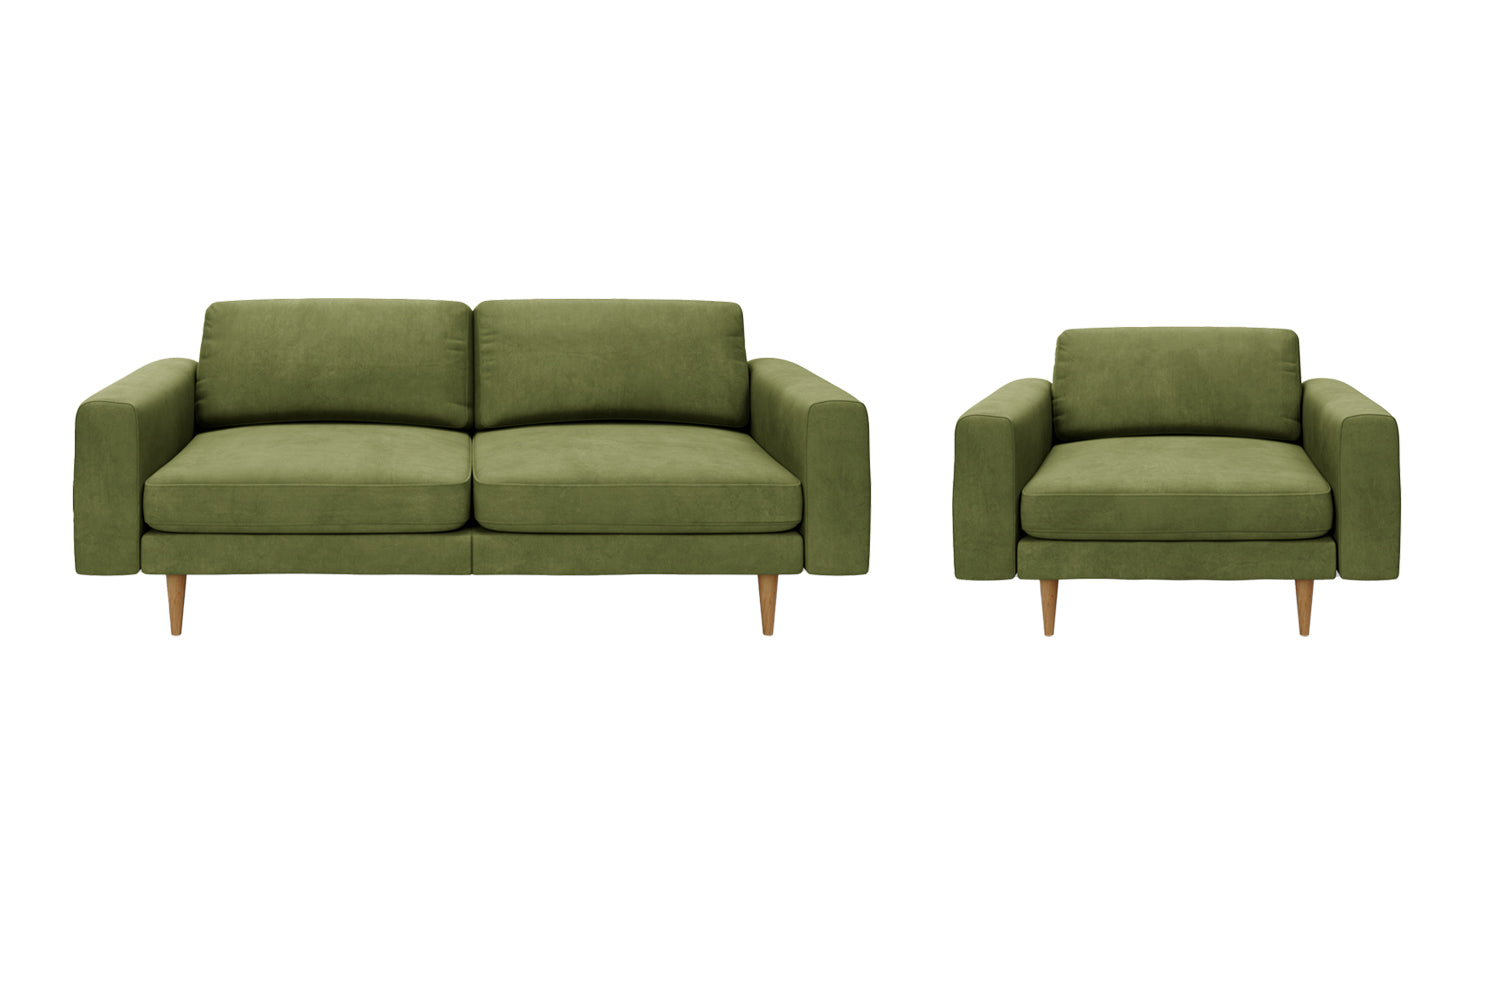 The Big Chill - 3 Seater Sofa and 1.5 Seater Snuggler Set - Olive